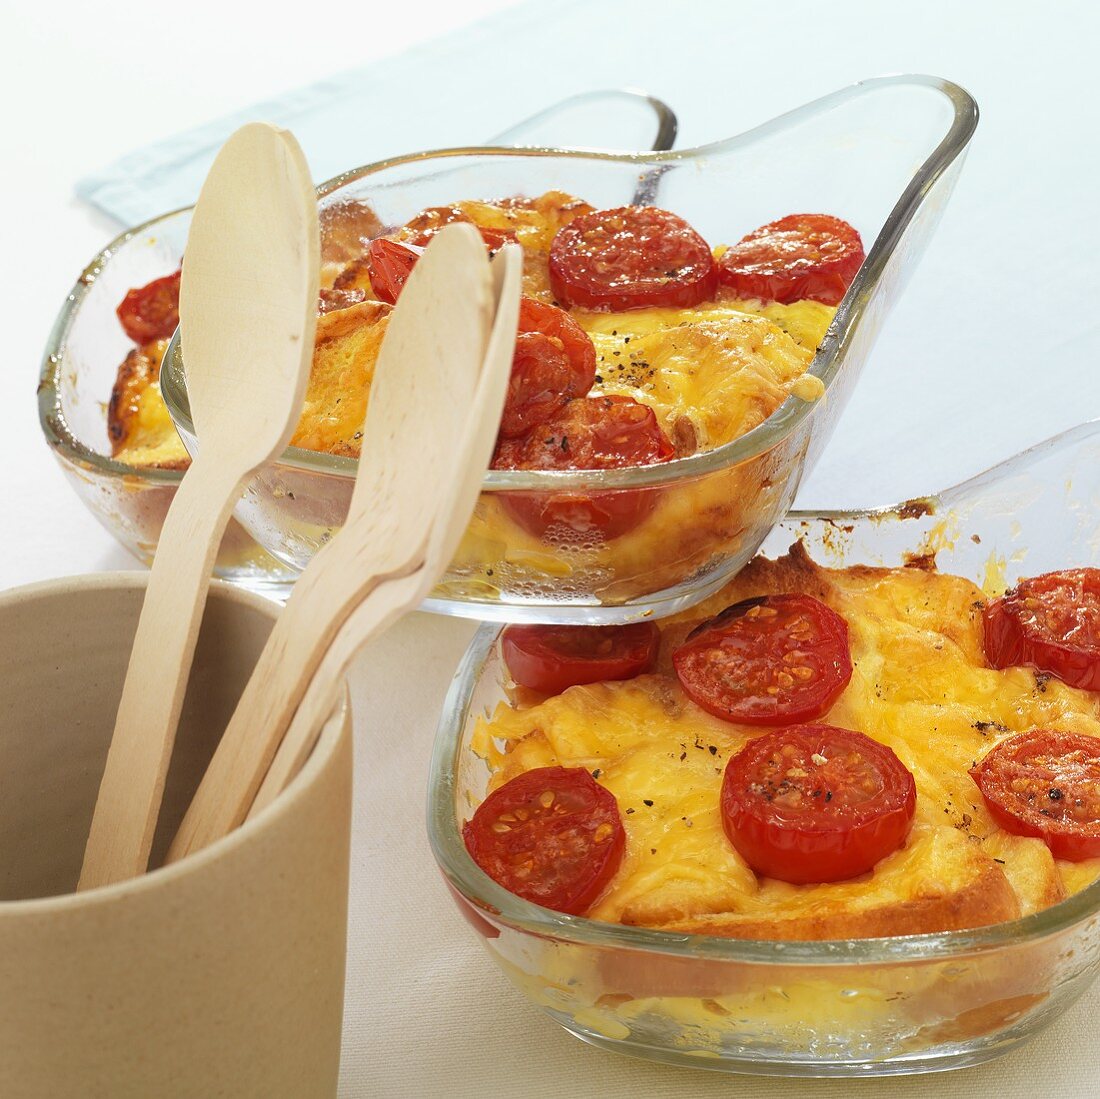 Bread bake with cheese and tomato